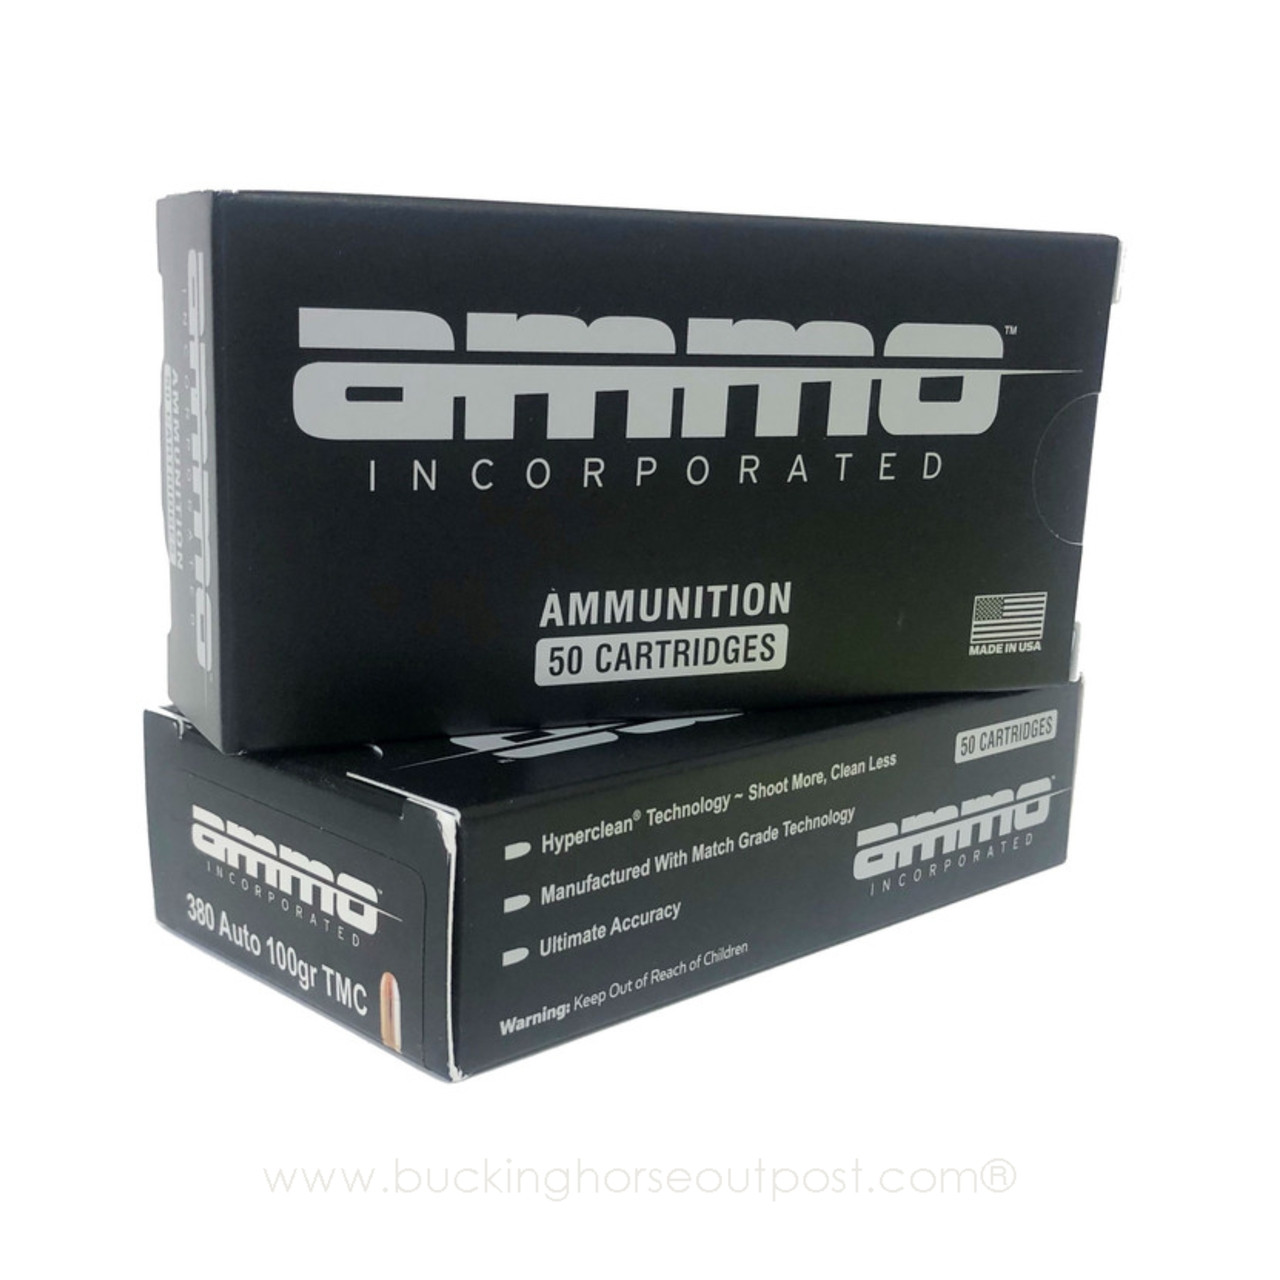 Ammo Inc. Signature .380 Auto 100 Grain Total Metal Coating 50rds Per Box (30037)- FREE SHIPPING ON ORDERS OVER $175